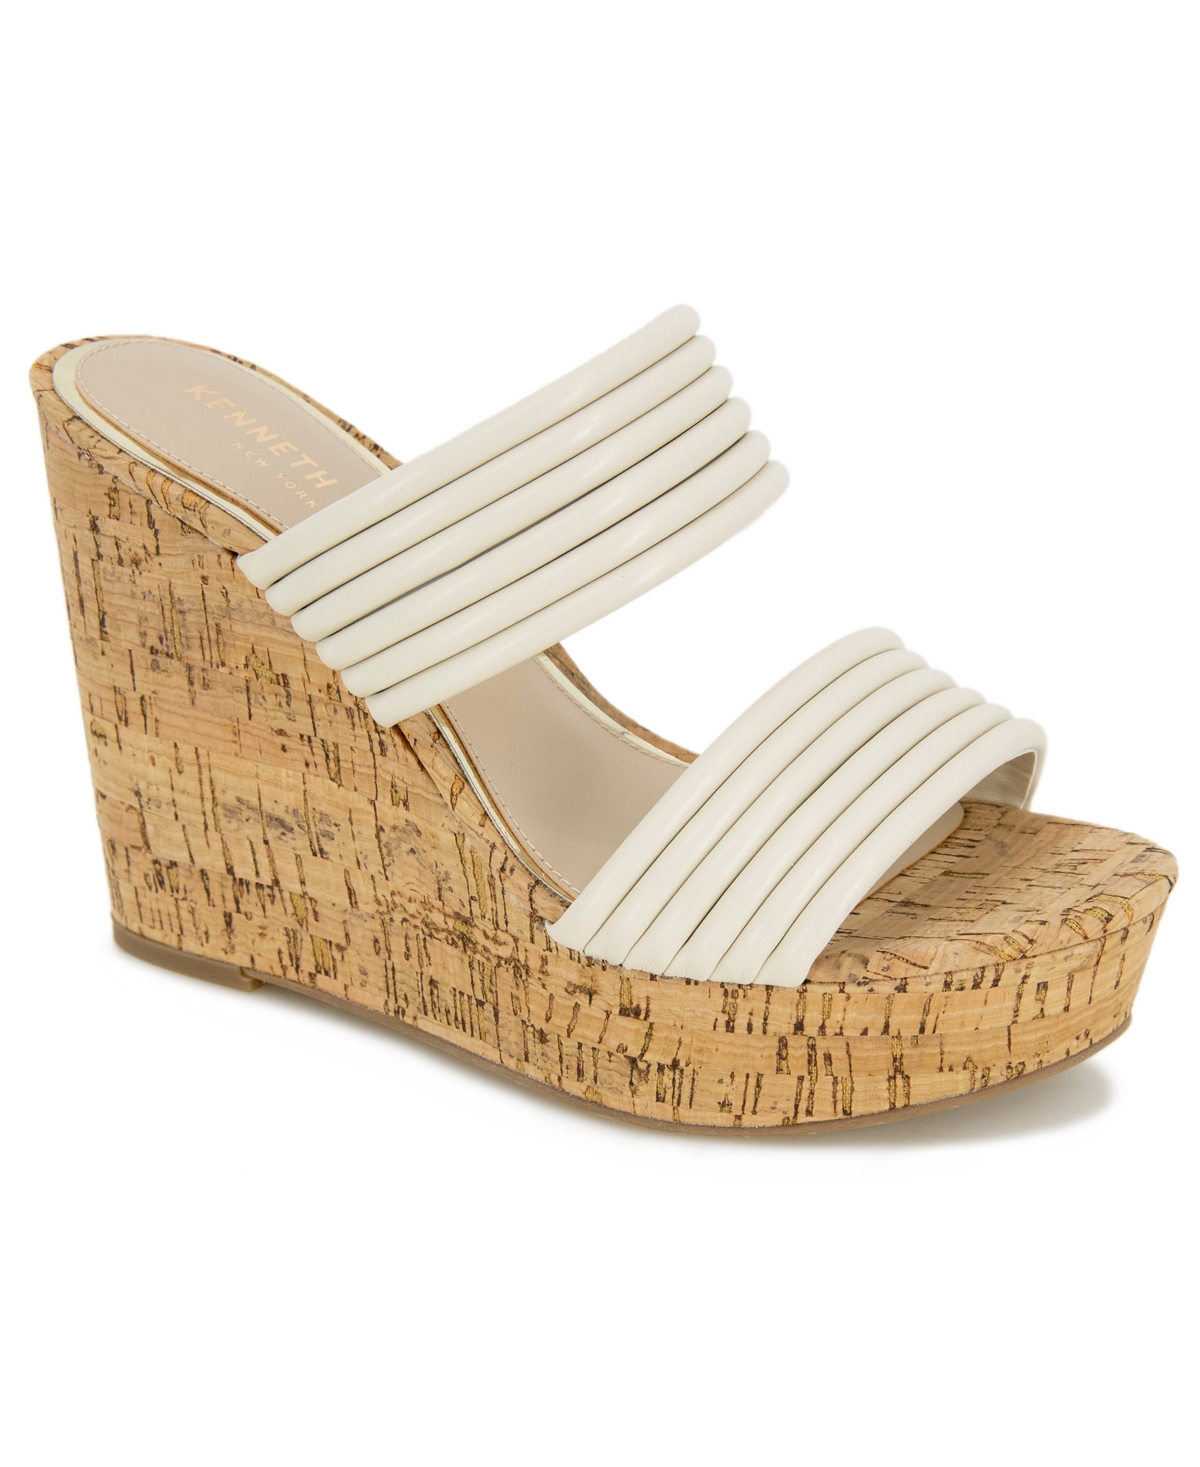 Kenneth Cole New York Women's Cailyn Wedge Sandals Women's Shoes